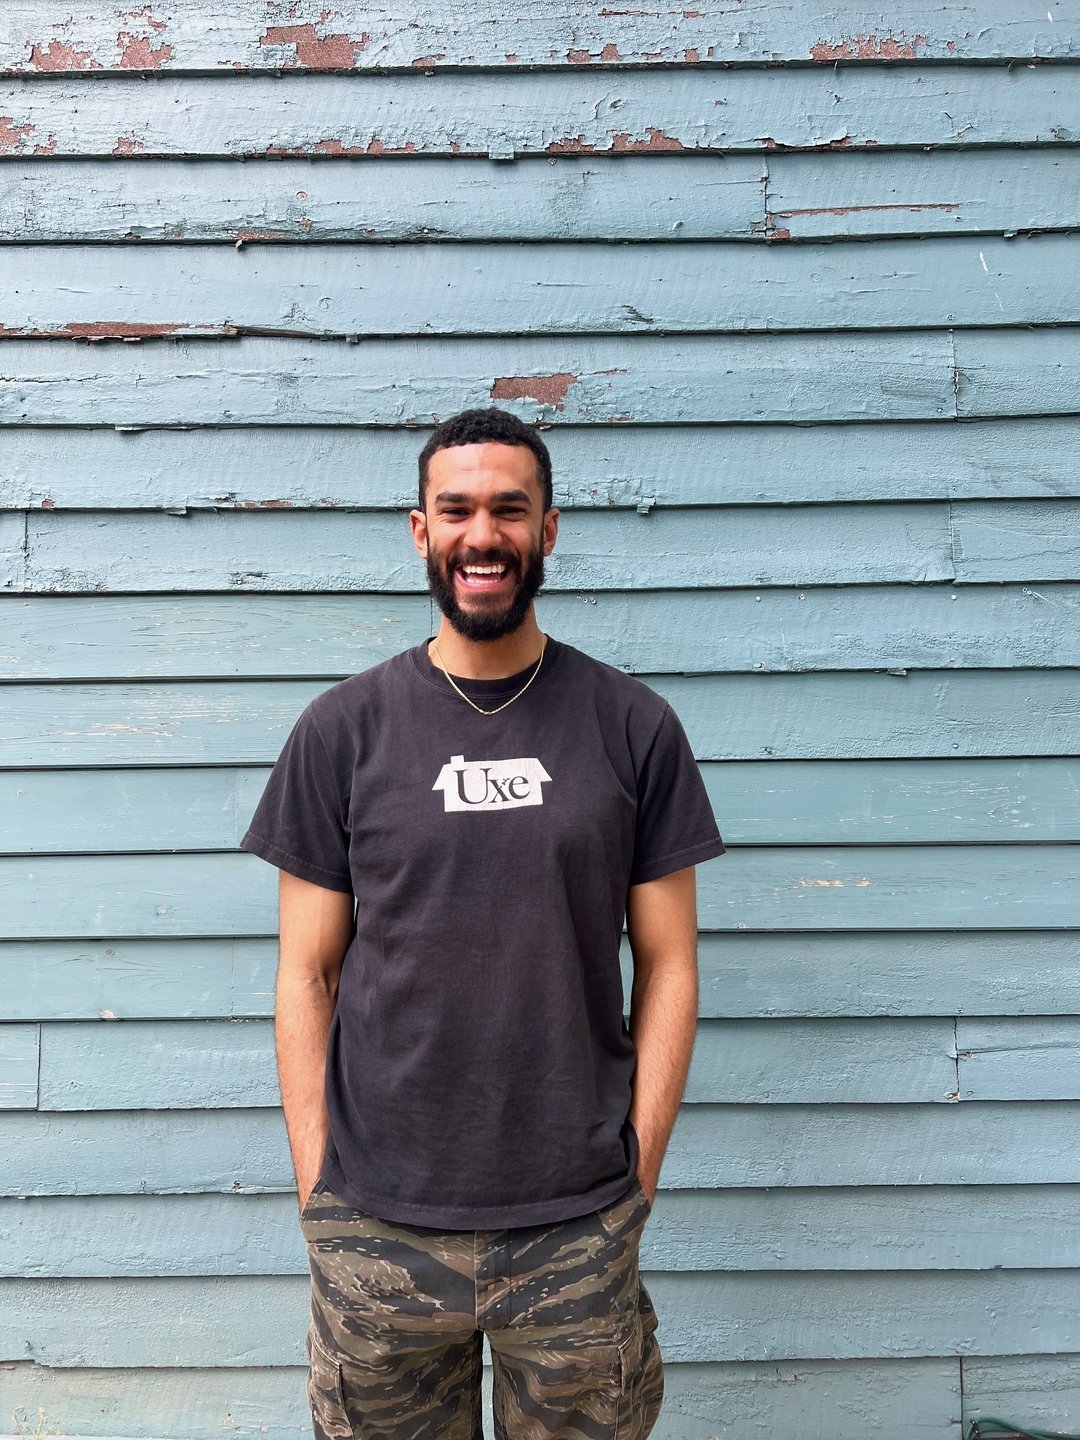 Excited to welcome Nate (@langstonpalmer) to our community! 🎉✨ As he settles into our space, we're looking forward to the creativity and inspiration that will unfold during his 10-week residency.  Stay tuned for behind-the-scenes glimpses into Nate'